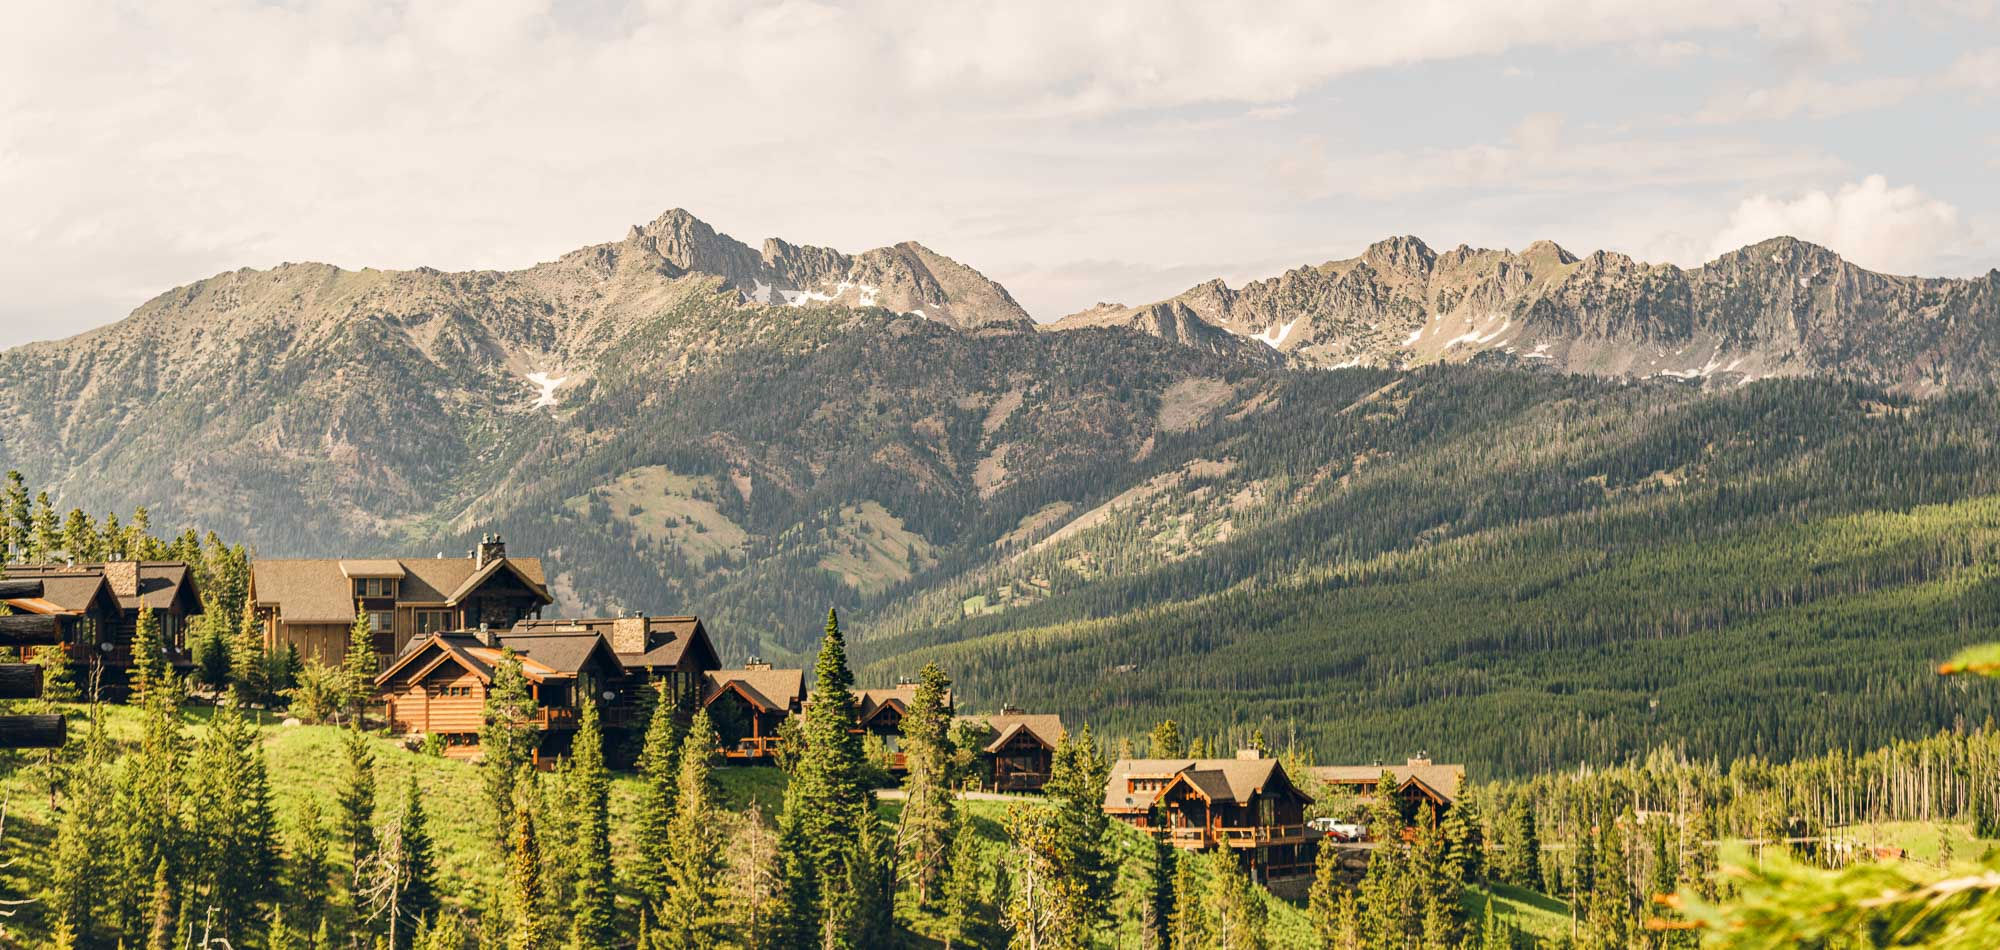 Vacation homes in Big Sky, Montana